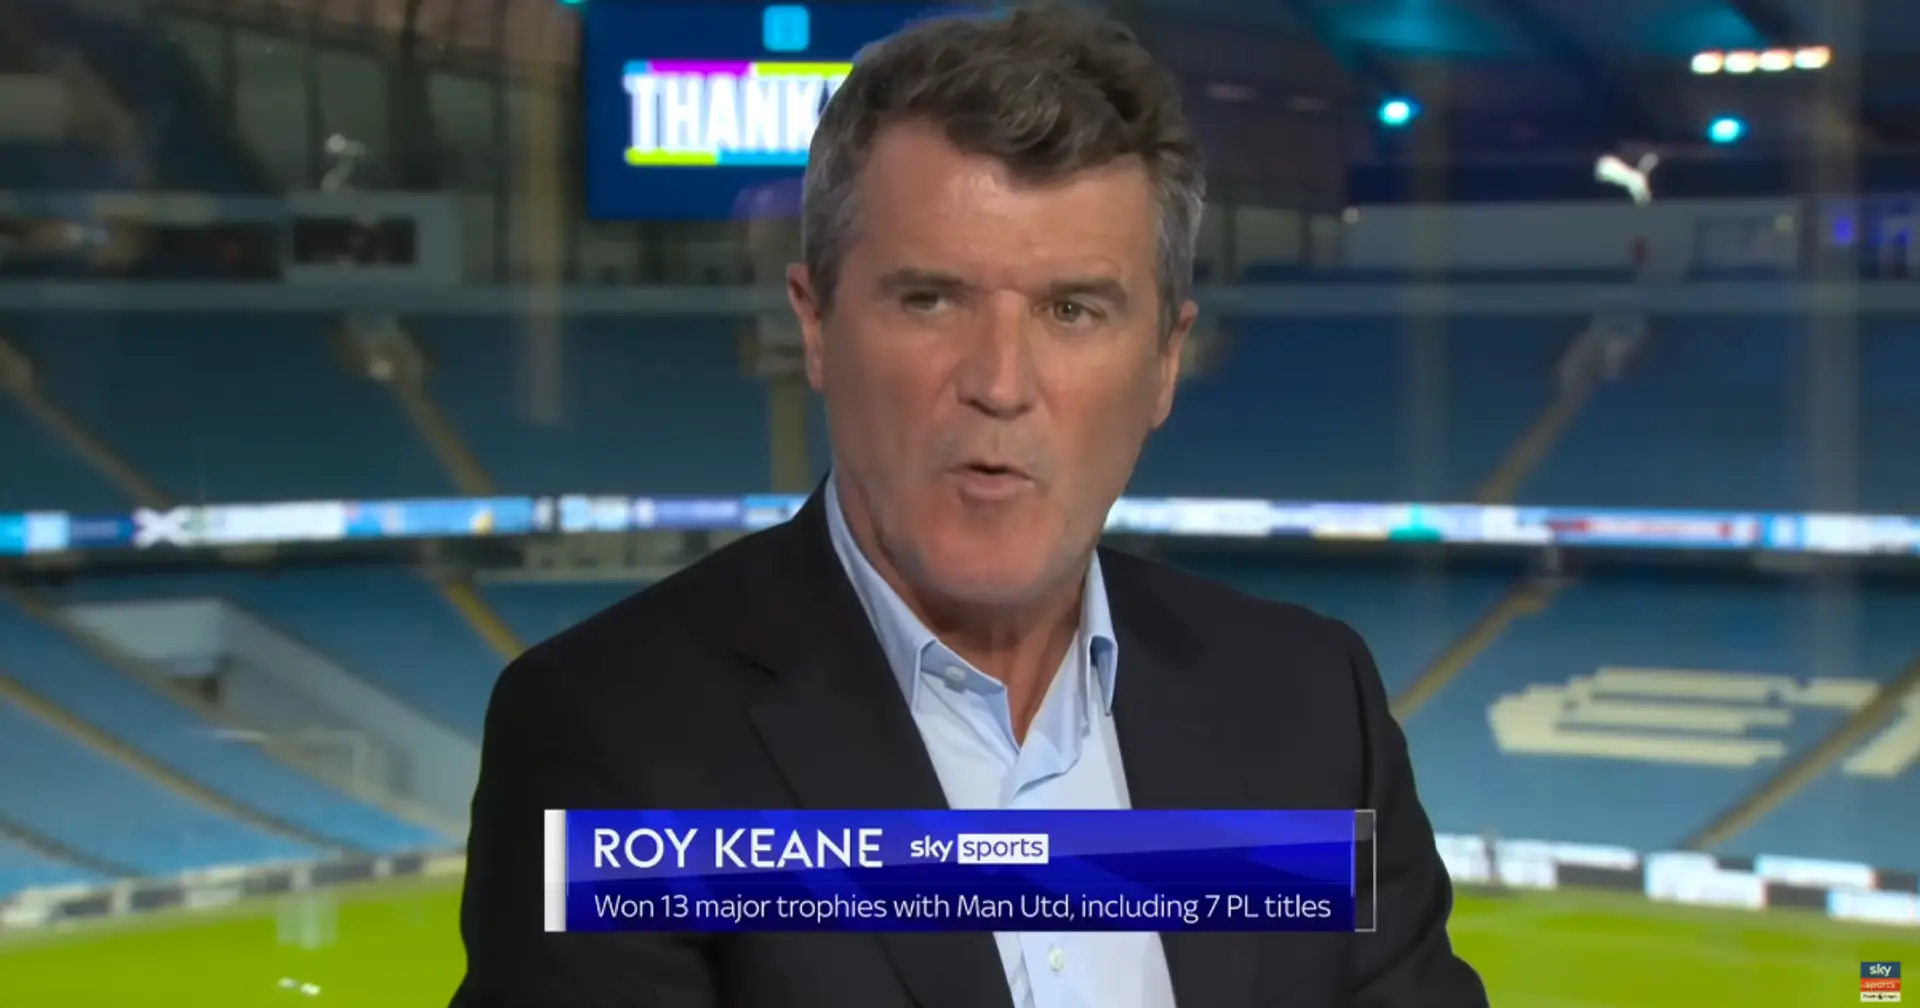 Roy Keane not convinced by Man United's top 4 chances — he explains why